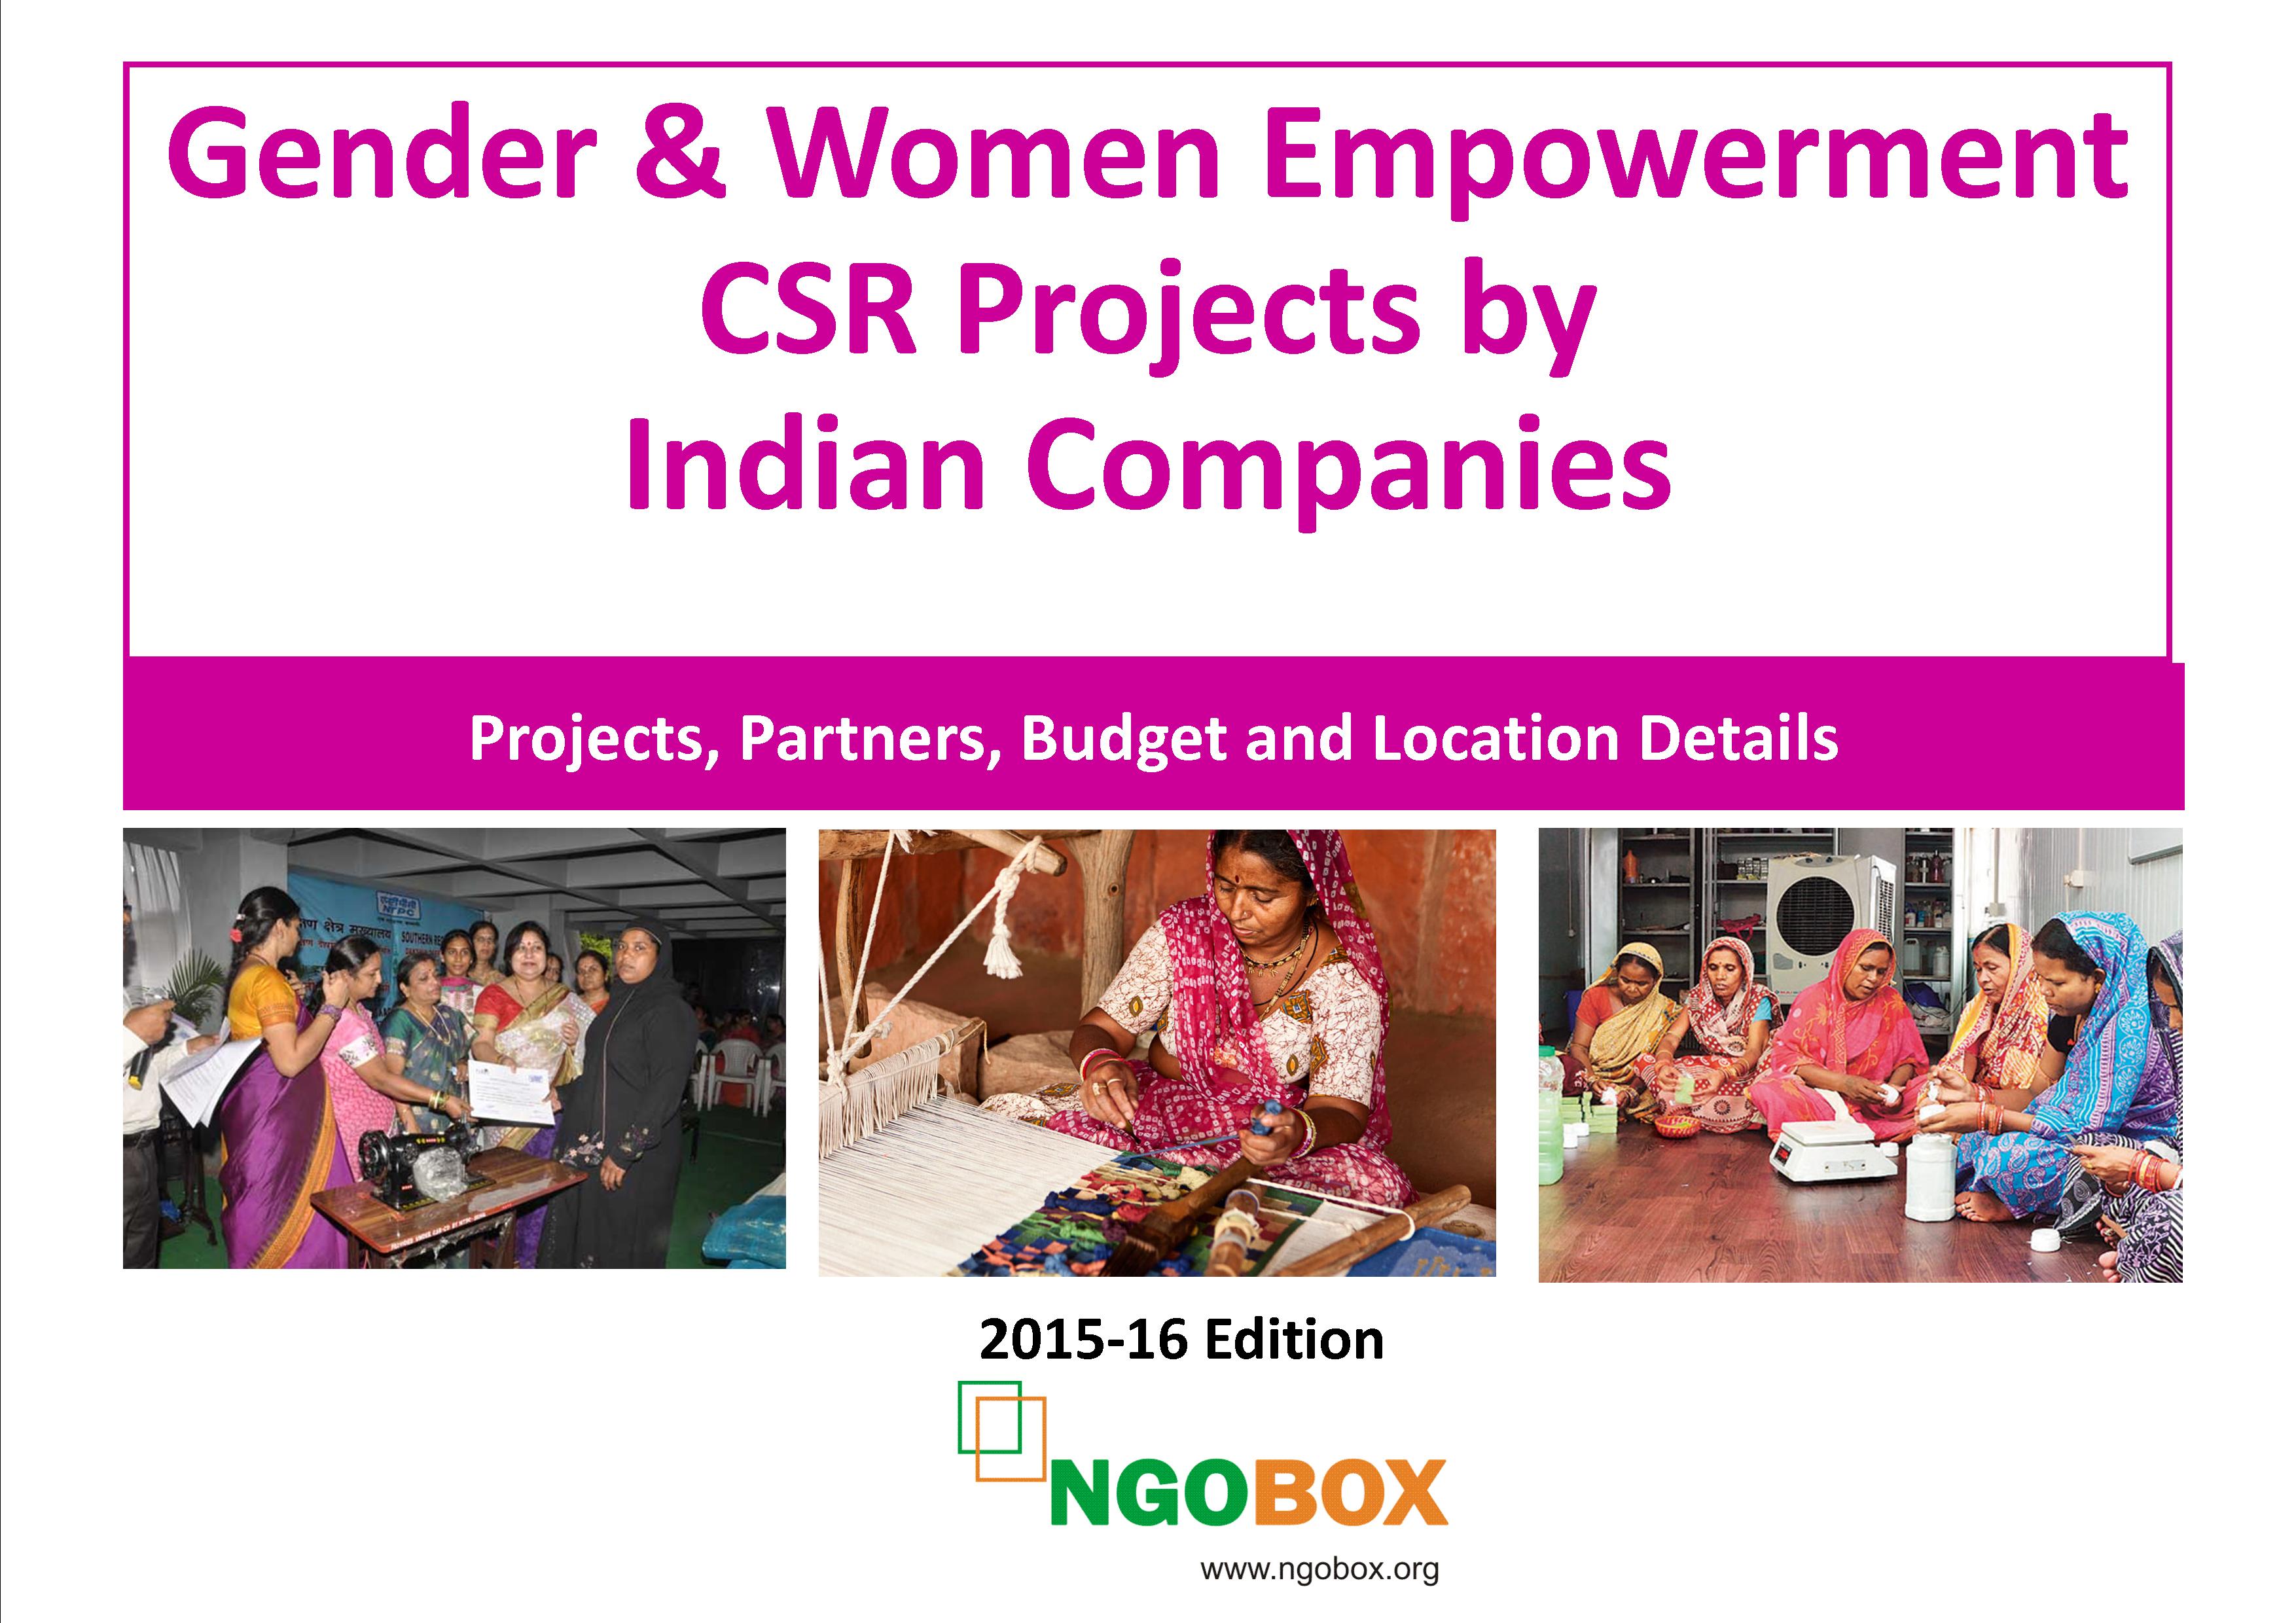 Gender and Women Empowerment CSR Projects by Indian Companies